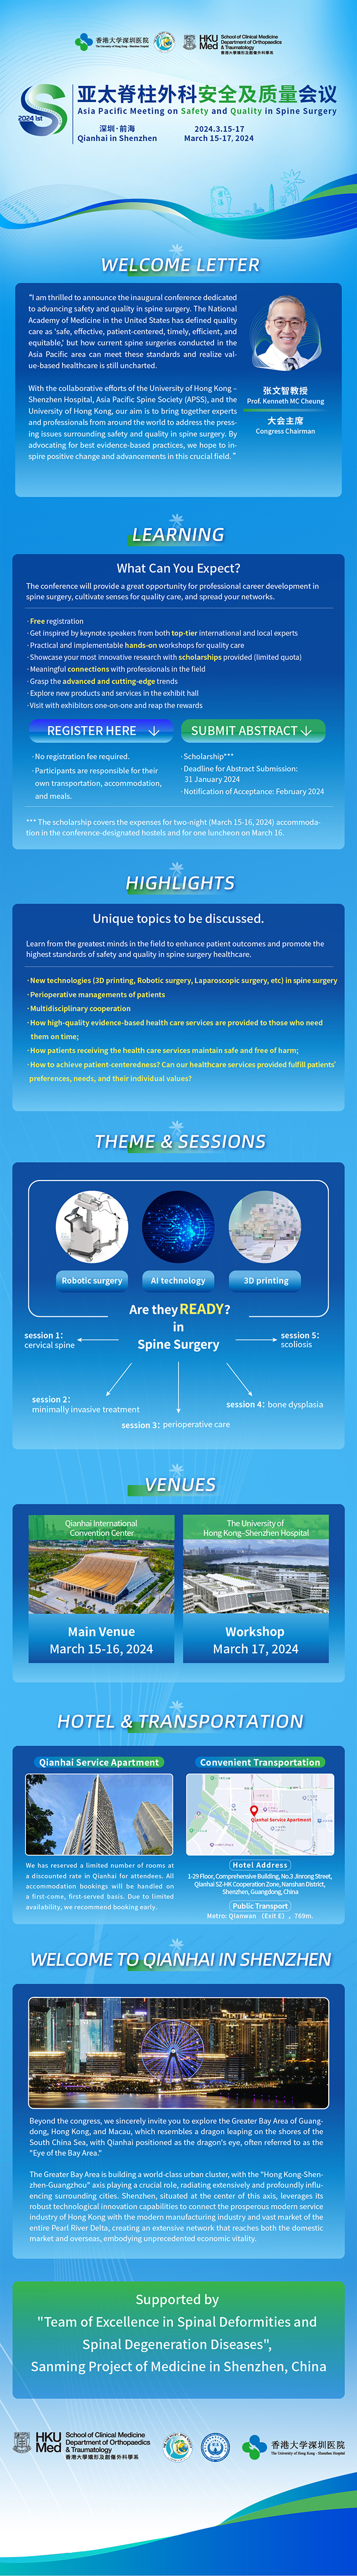 Asia Pacific Meeting on Safety and Quality of Spine Surgery (2024)